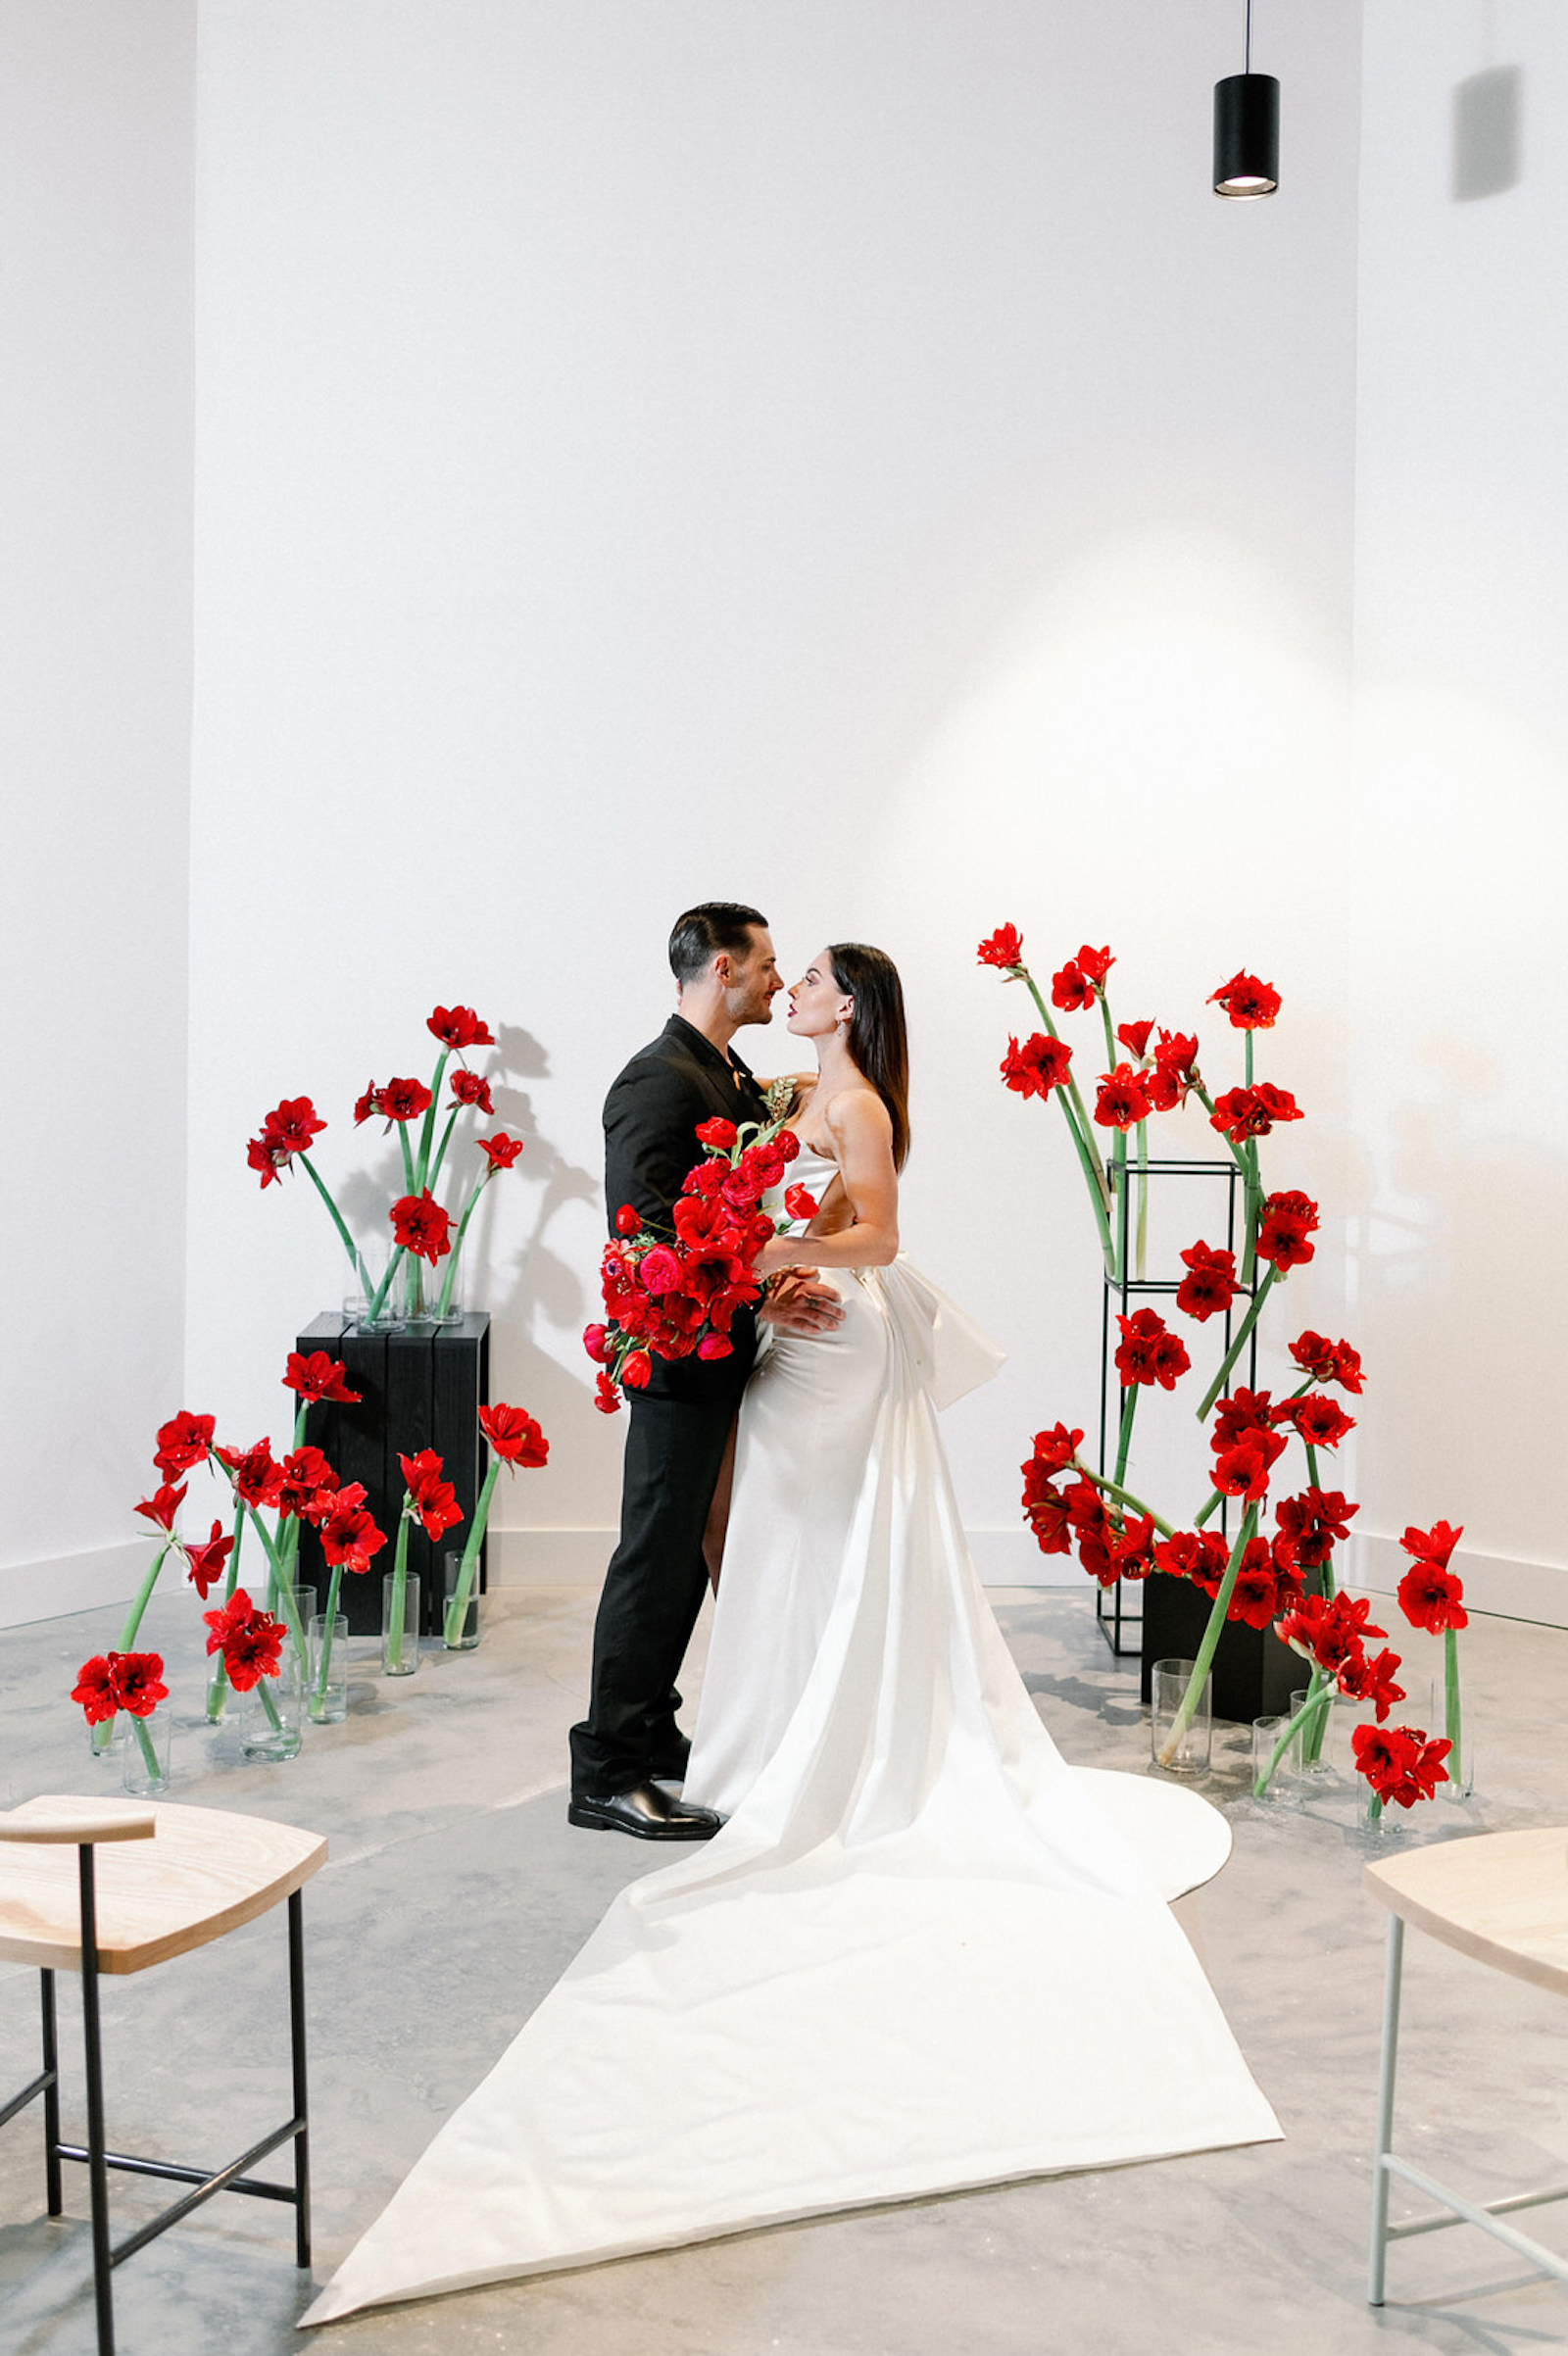 Modern Clean Indoor Ceremony Space at Tampa Wedding Venue Hyde House | Black White and Red Ceremony Backdrop with Red Amaryllis and Black Columns | Dramatic Modern Ines di Santo Wedding Dress by Isabel Oneil Bridal | Groom in All Black Suit | Modern Dramatic Unique Asymmetrical Red Wedding Bridal Bouquet with Ranunculus Tulips Protea Roses Anemone and Amaryllis